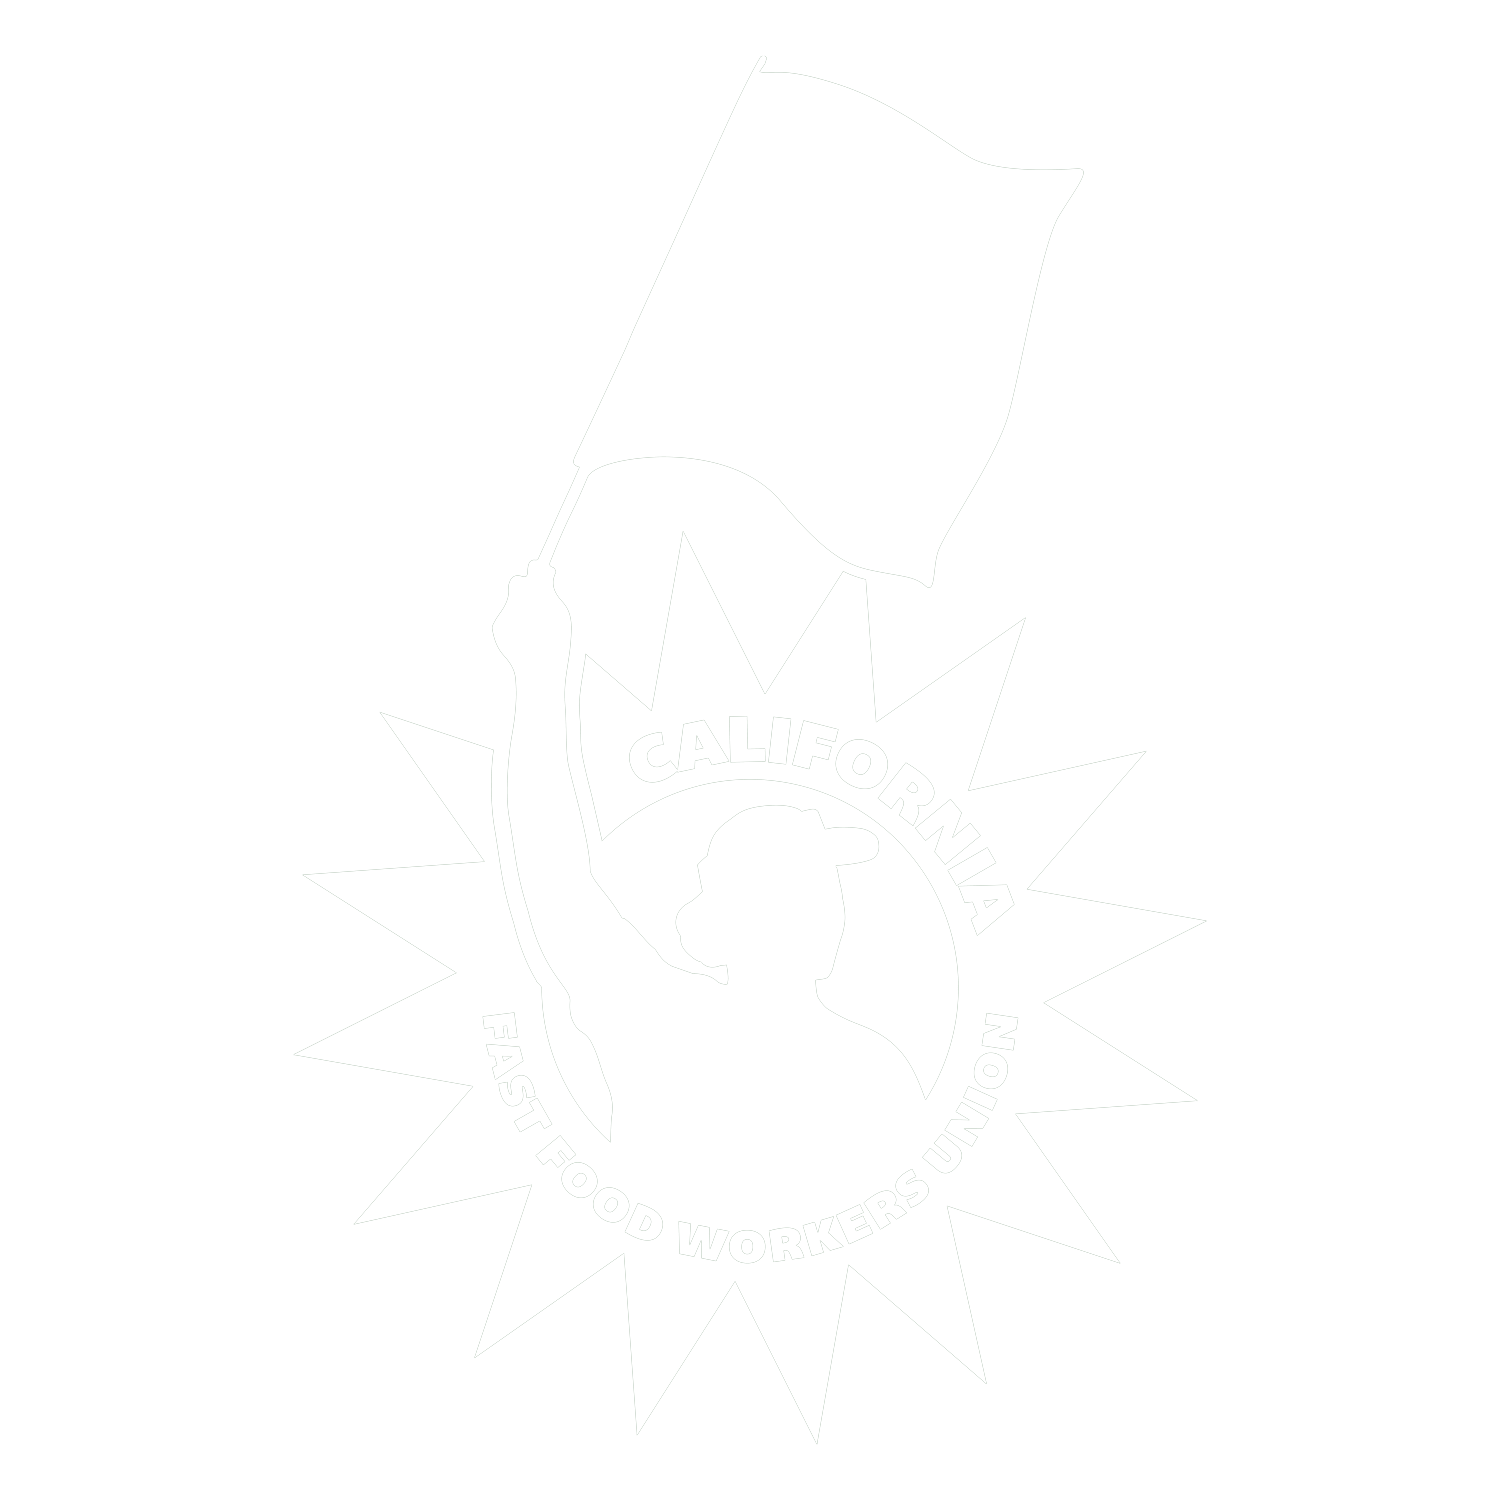 California Fast Food Workers Union